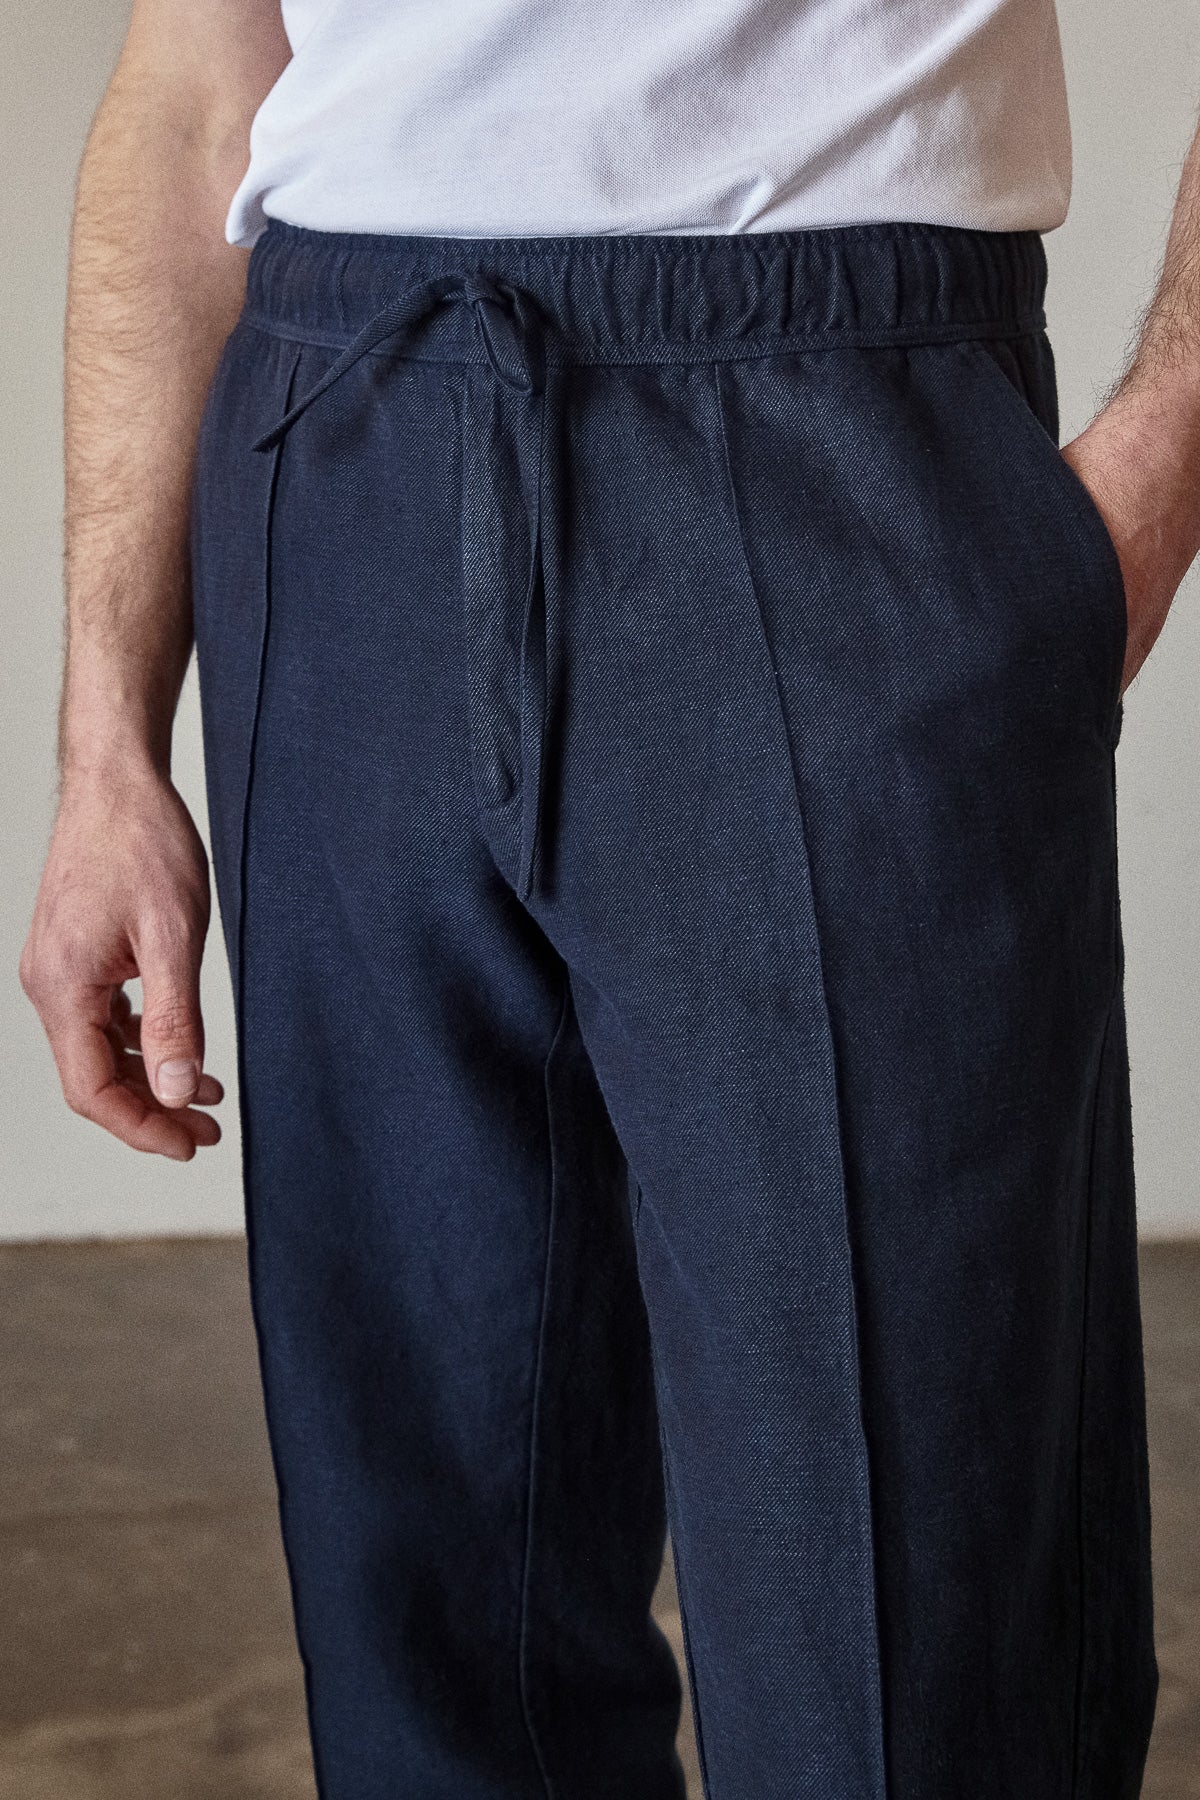 MAX trousers navy winter linen